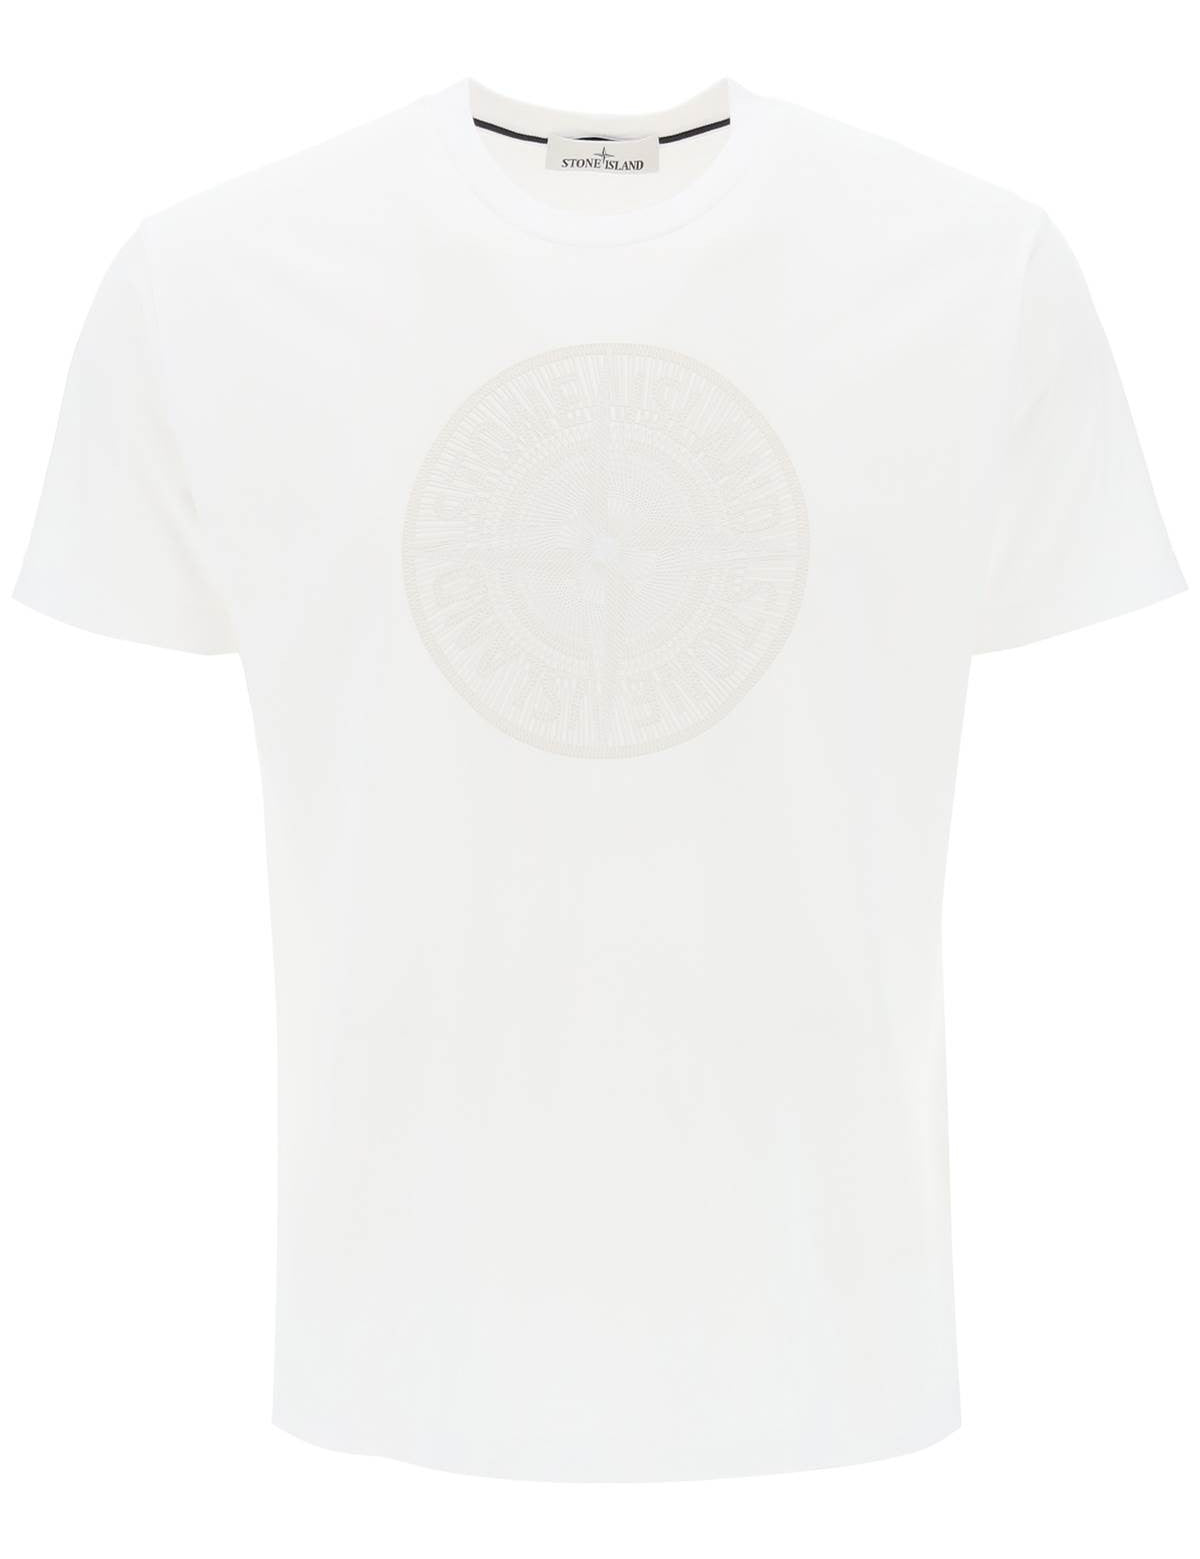 stone-island-t-shirt-with-print-on-the-chest.jpg